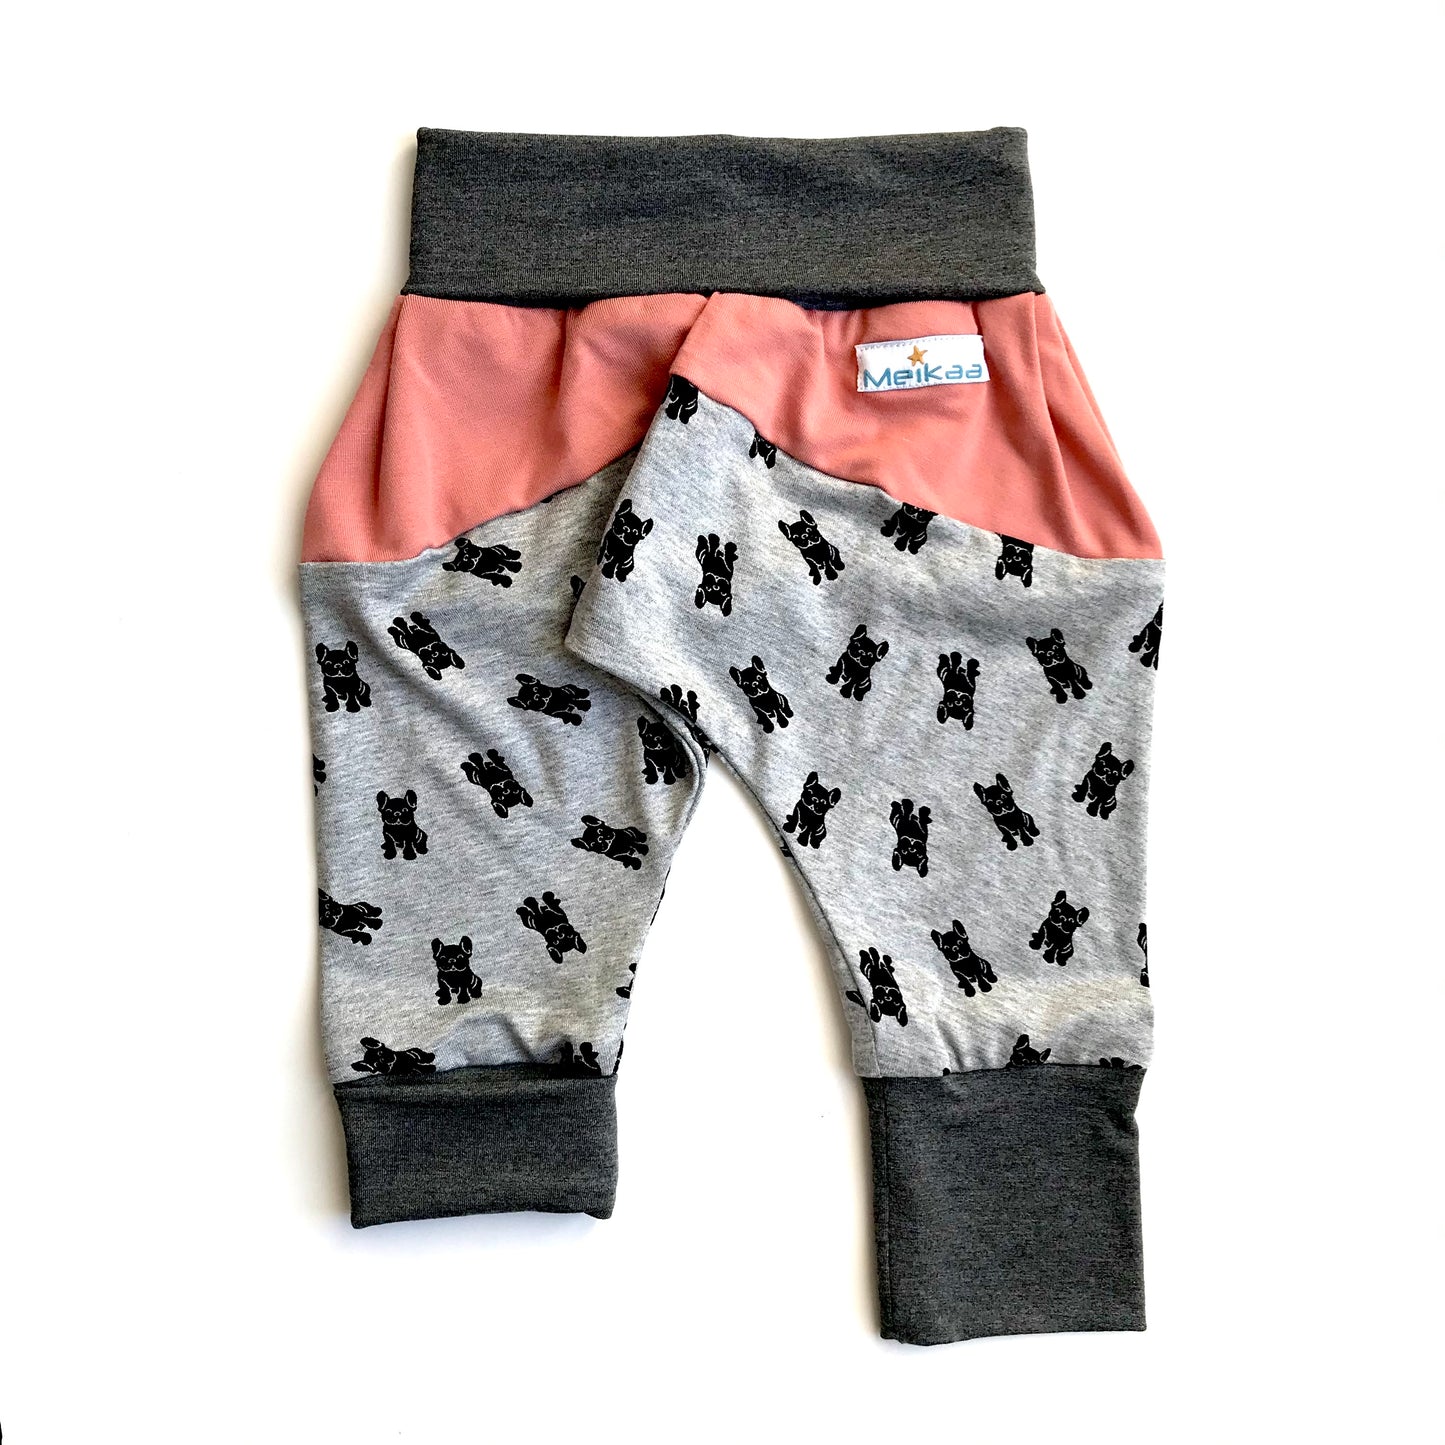 Puppies Edition - BAMBOO and Rayon Harem Swaggers, Evolutive and Growing Pants